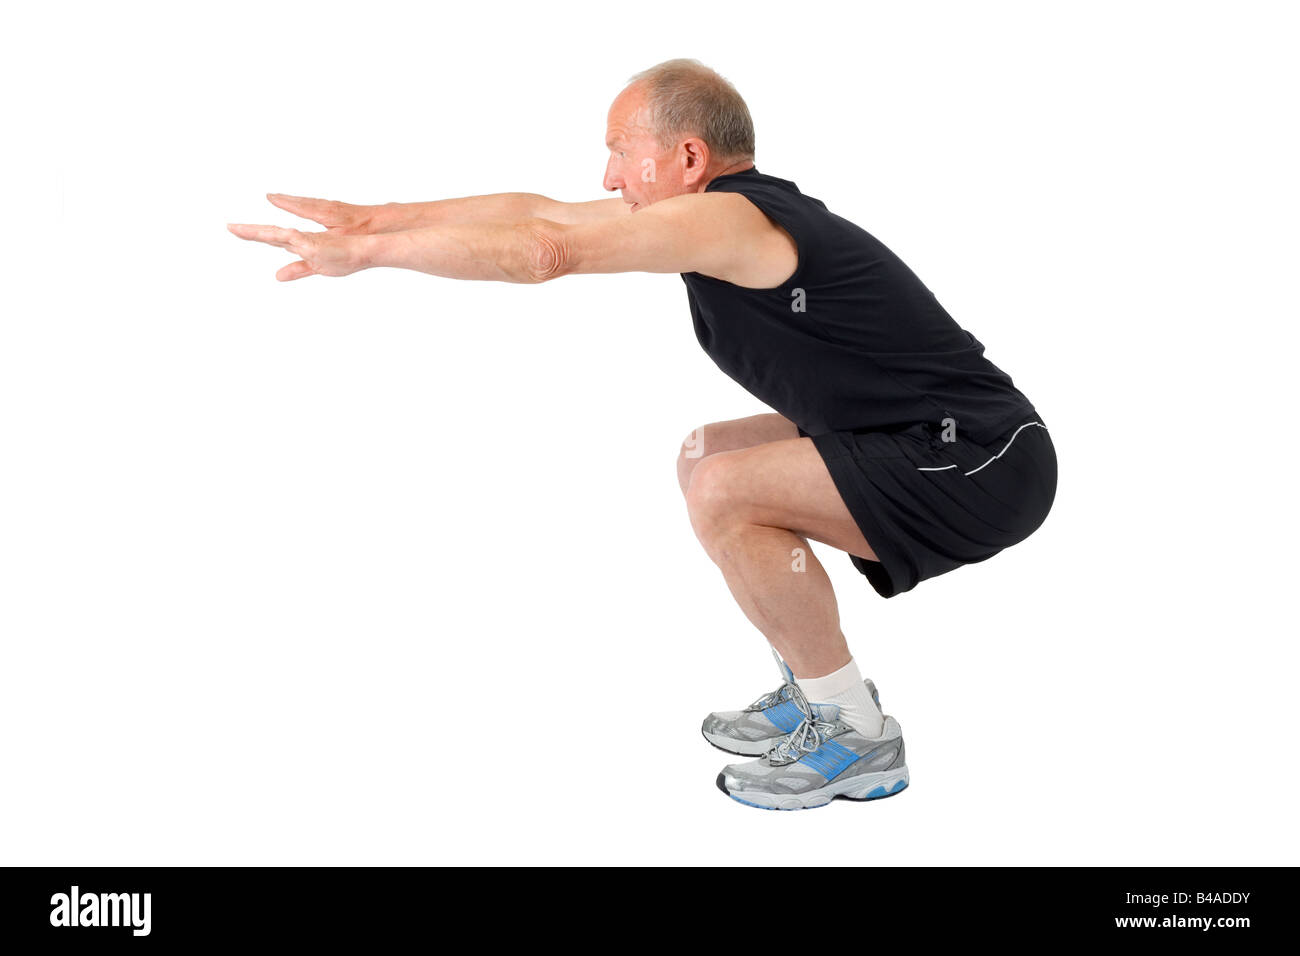 Muscular man squat one leg Cut Out Stock Images & Pictures - Alamy